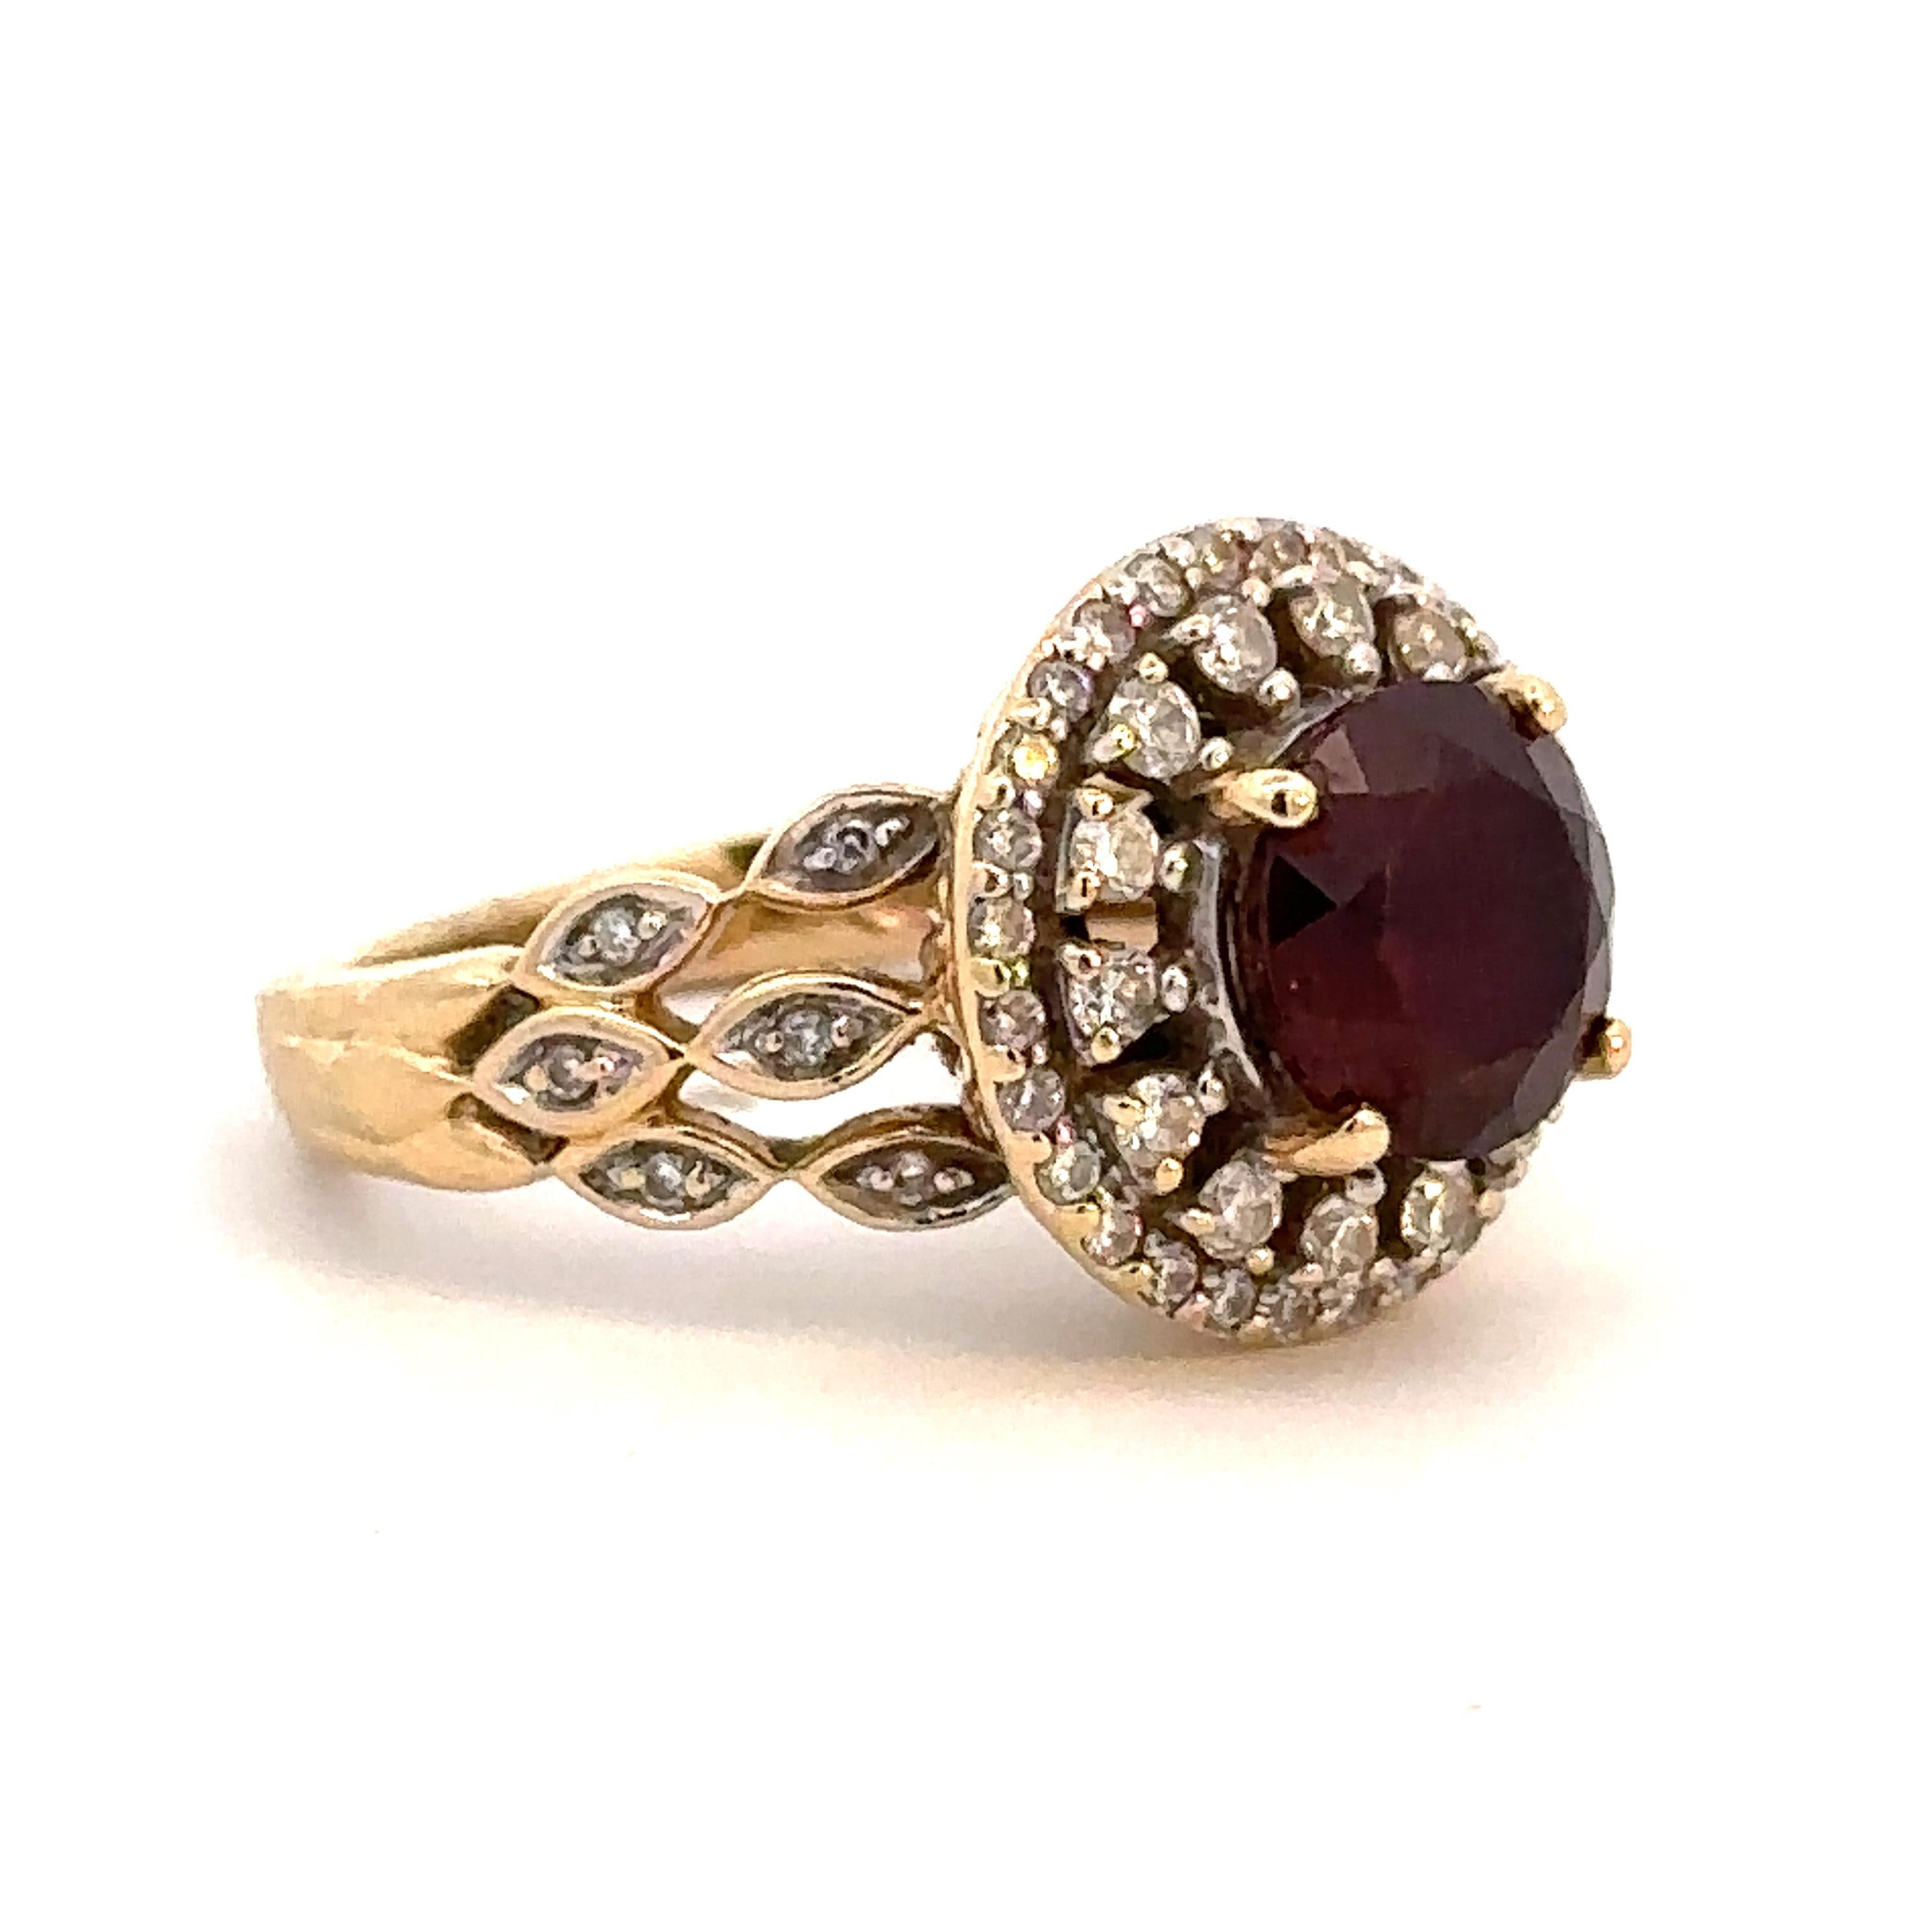 An ornate vintage 14k yellow gold ring presenting a garnet within a double halo of diamonds, with additional diamonds along the shank. The garnet has a rich red hue and weighs approximately 2.43 carats. The ring is a size 5.5, but can easily be